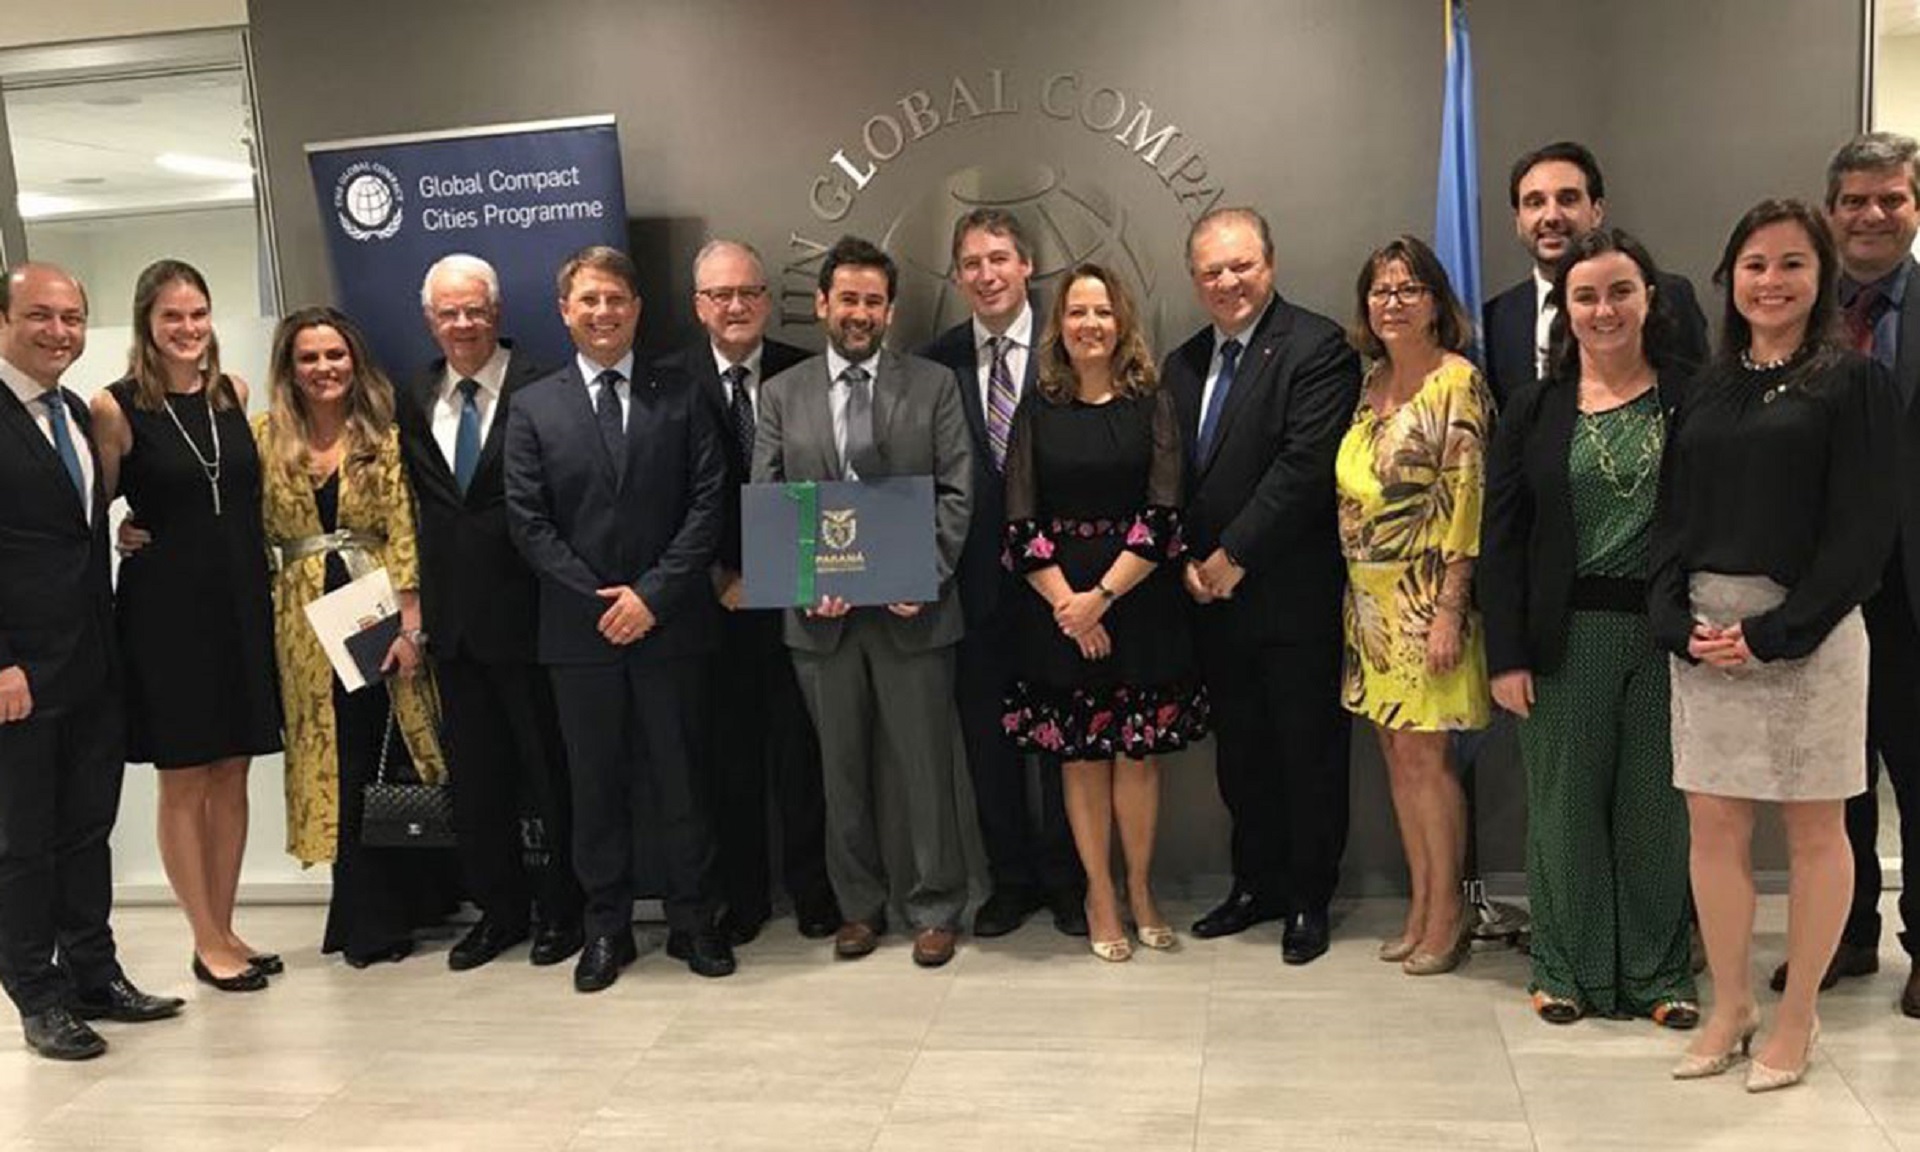 The Brazil office partnership has attracted partners from the United Nations Global Compact, World Economic Forum, UN-Habitat, COPEL, The Water Council, Paraná State government, Intel, CEDES and leaders of the University of São Paulo.